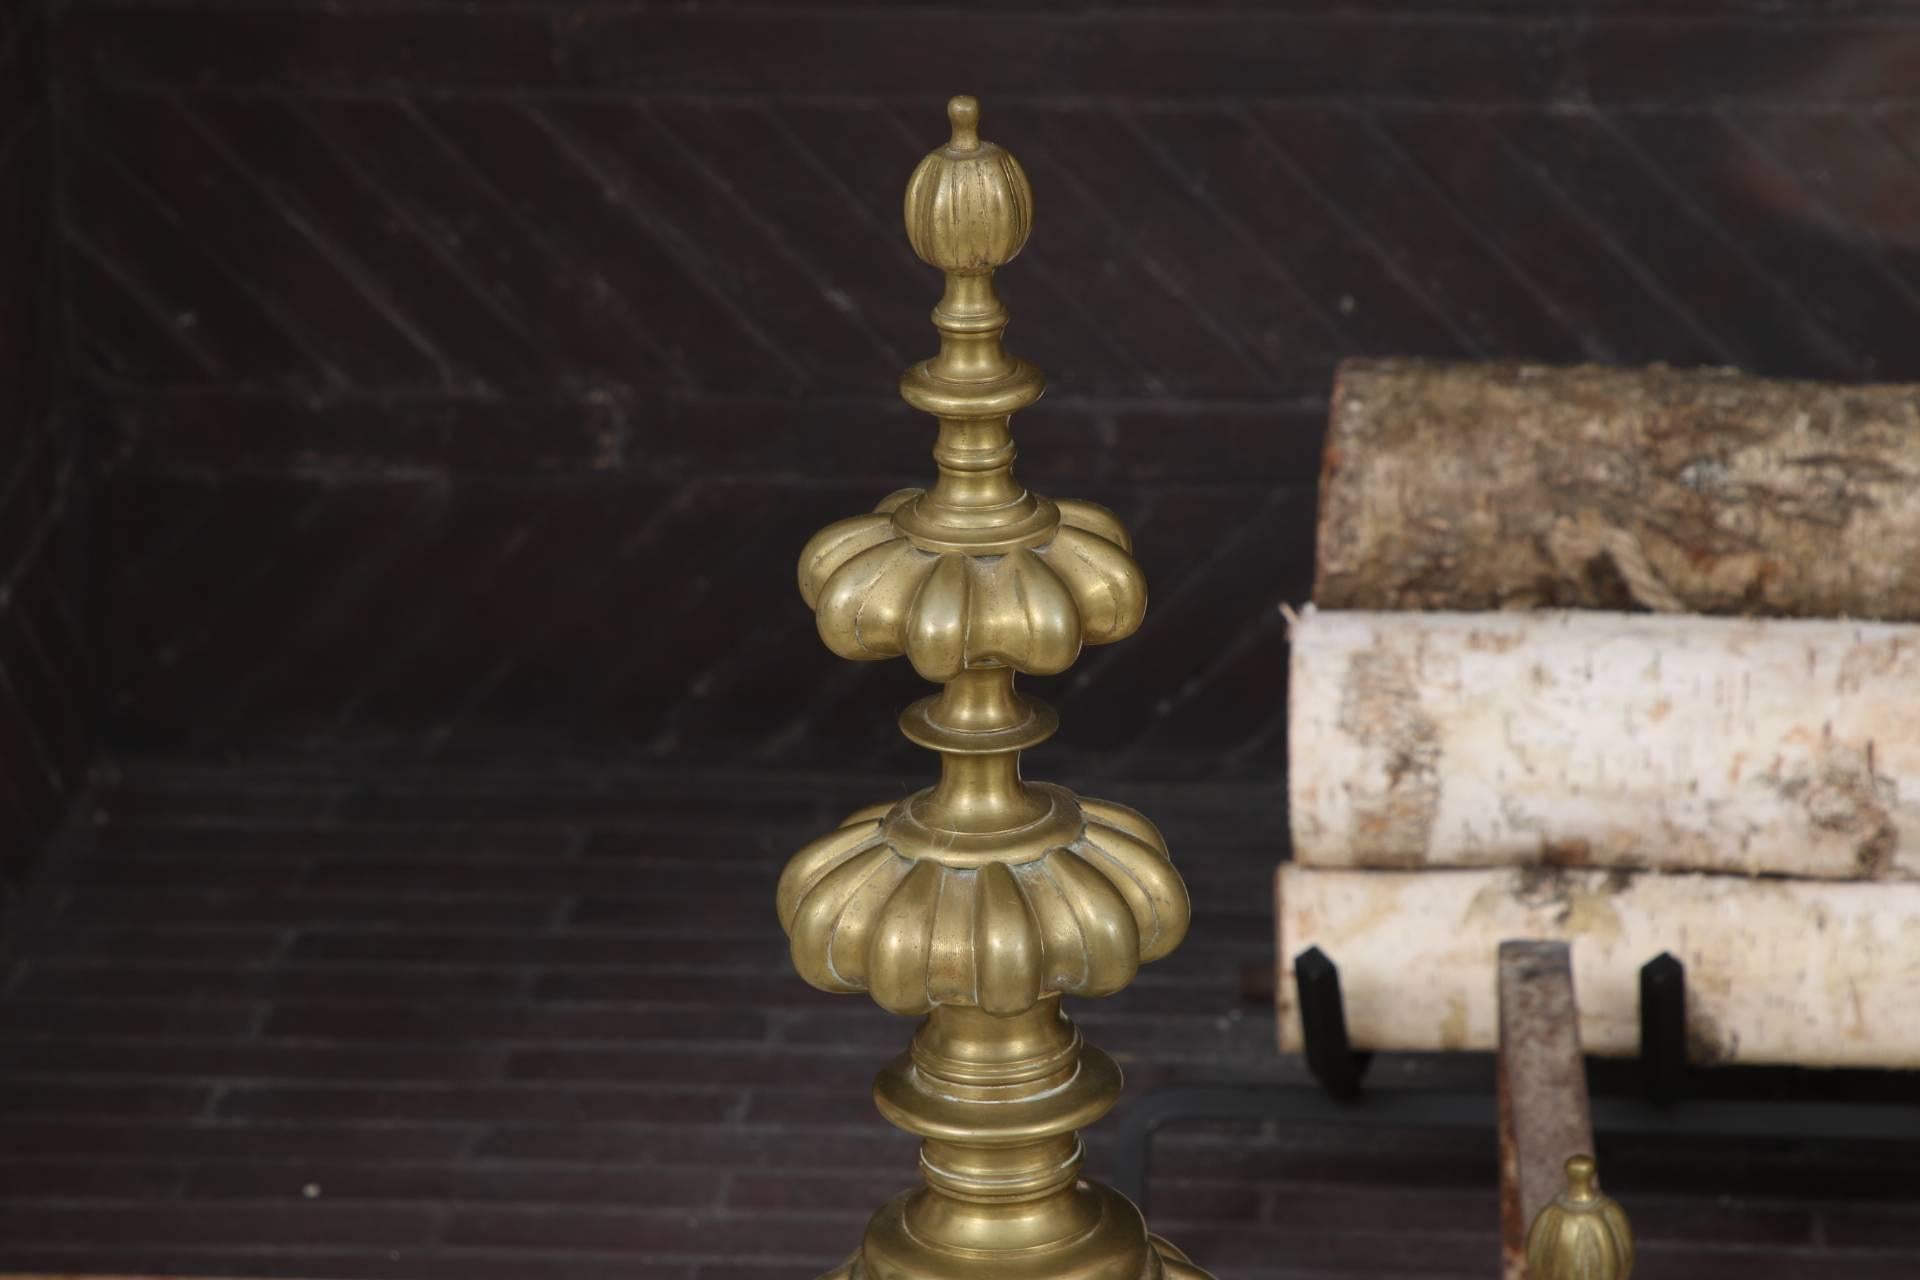 Pair of Massive Baroque Style Solid Brass Andirons In Good Condition For Sale In Bridgeport, CT